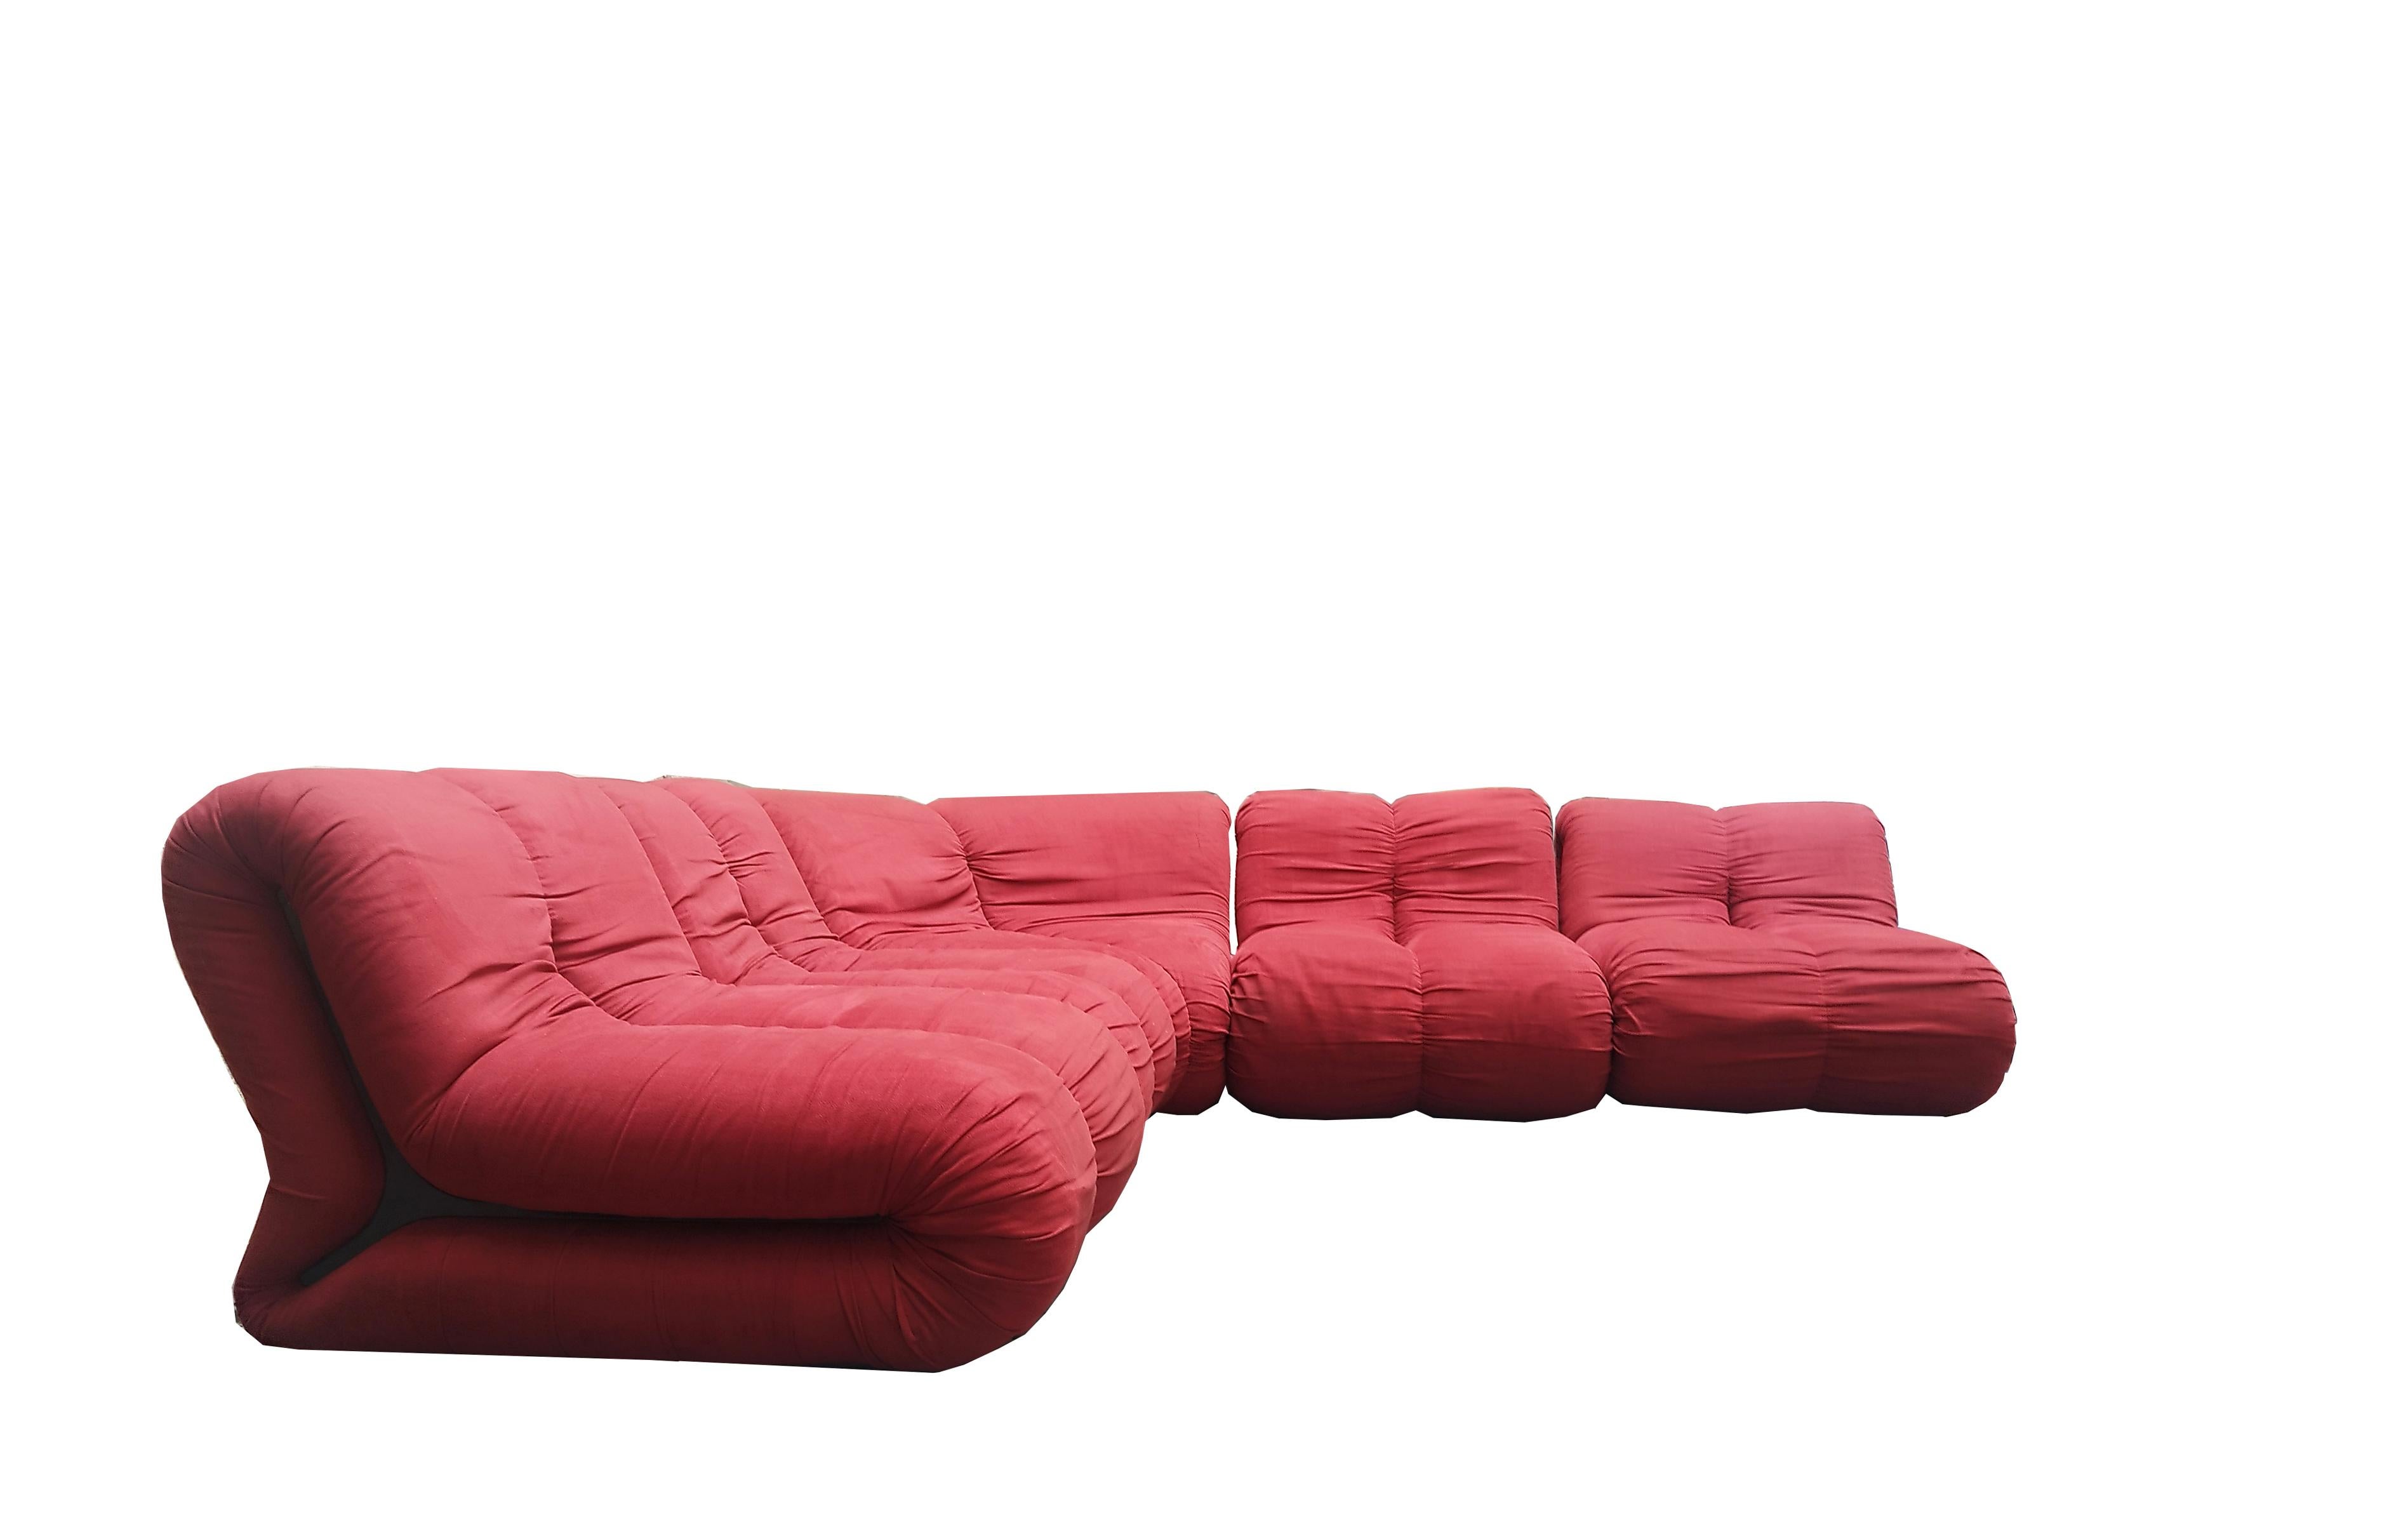 Iconic modular sofa Mod. Pagru' designed by Claudio Vagnoni for the company 1P in 1968. The modular sofa consists of 4 linear seats and a corner seat. Each seat has a wood and metal frame, black plastic sides, the upholstery is original of the time